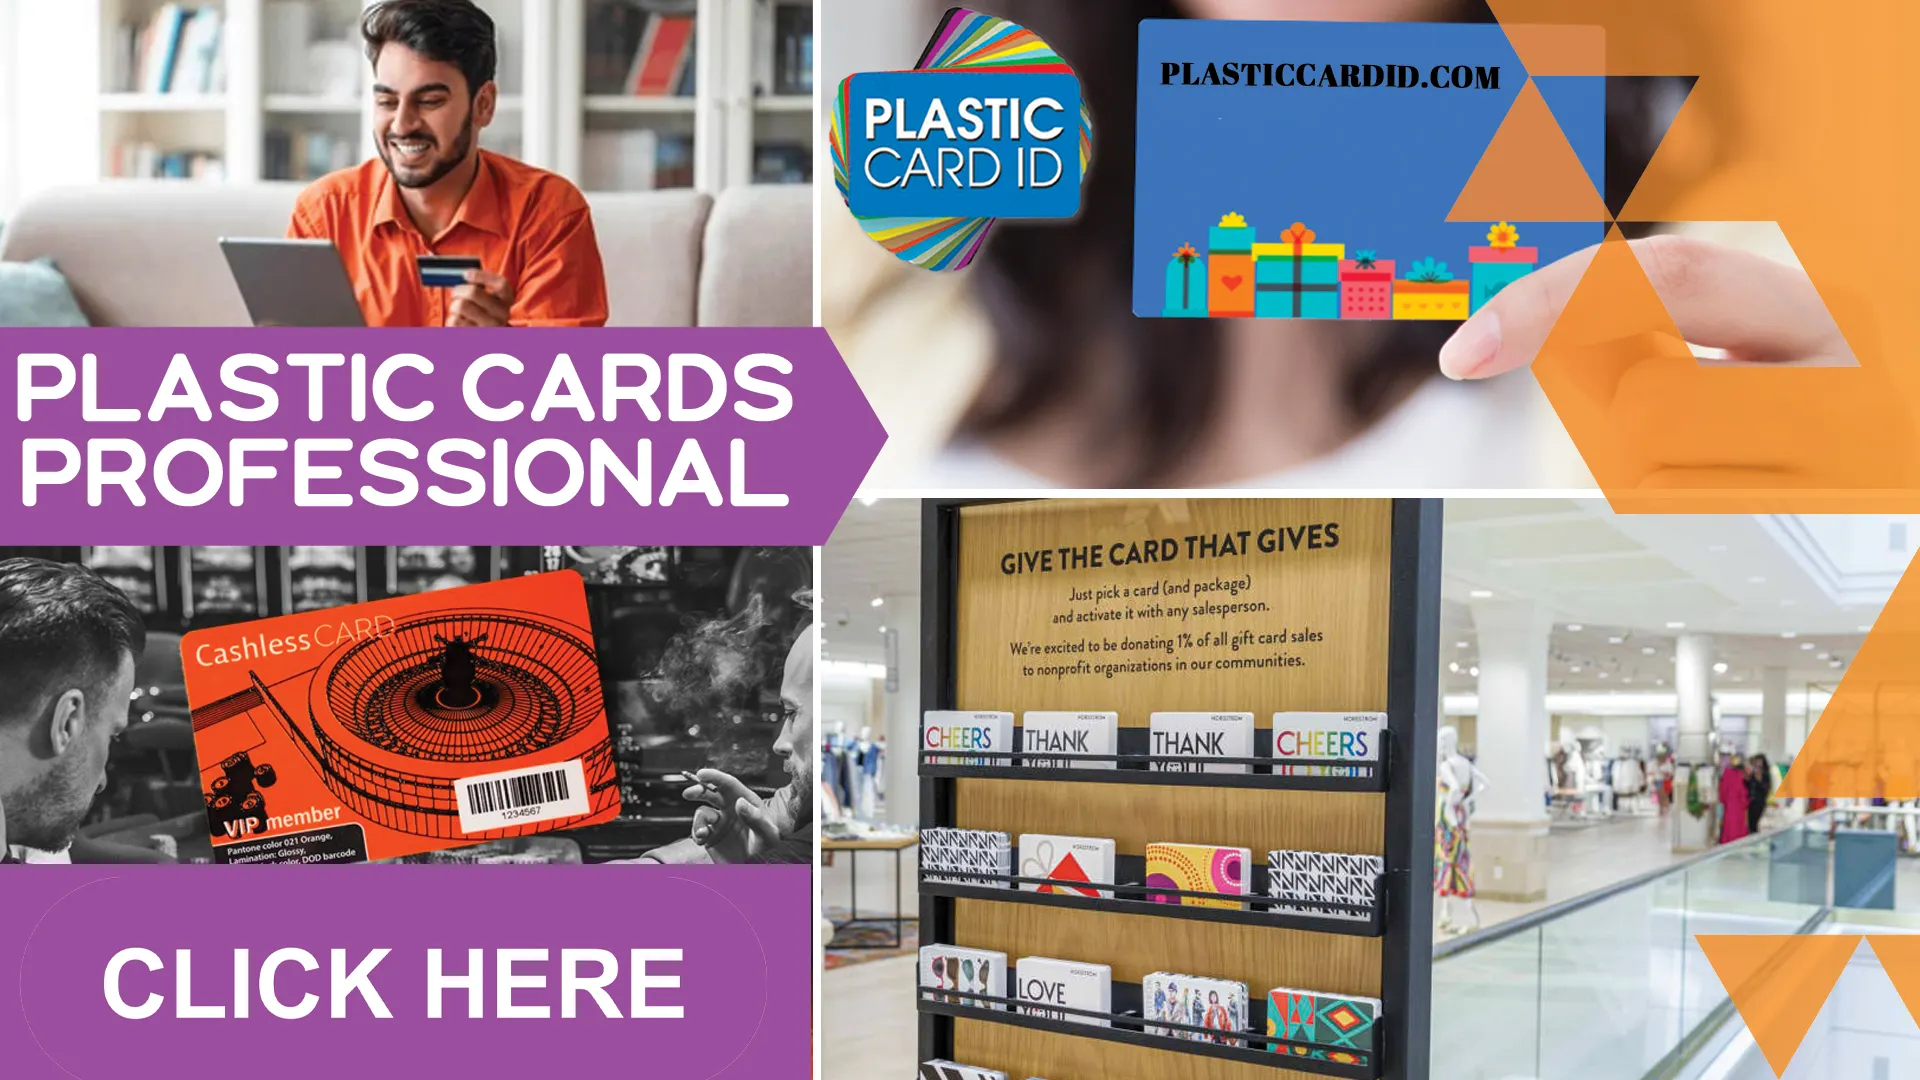 Welcome to Plastic Card ID




, Where Your Card Continuity is Our Priority